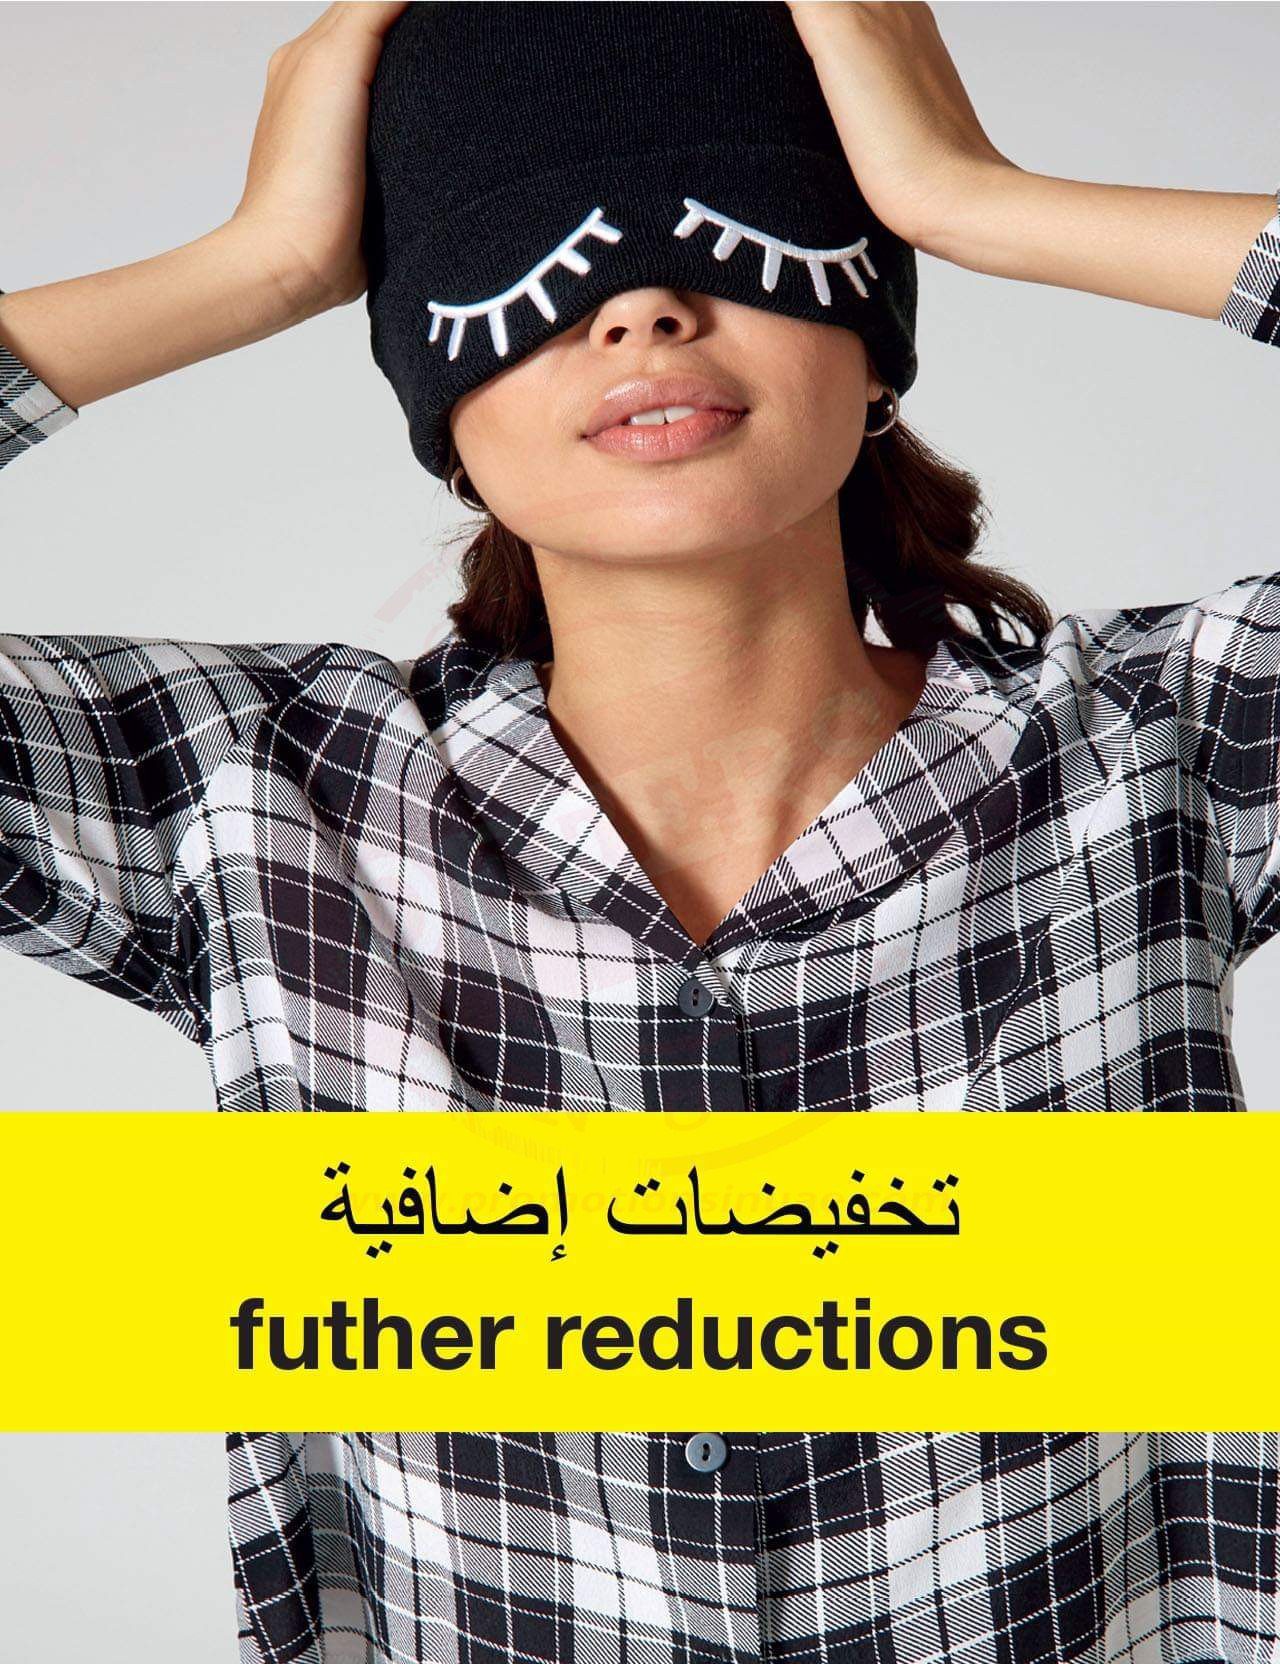 Further Reductions starts TODAY at Jennyfer.